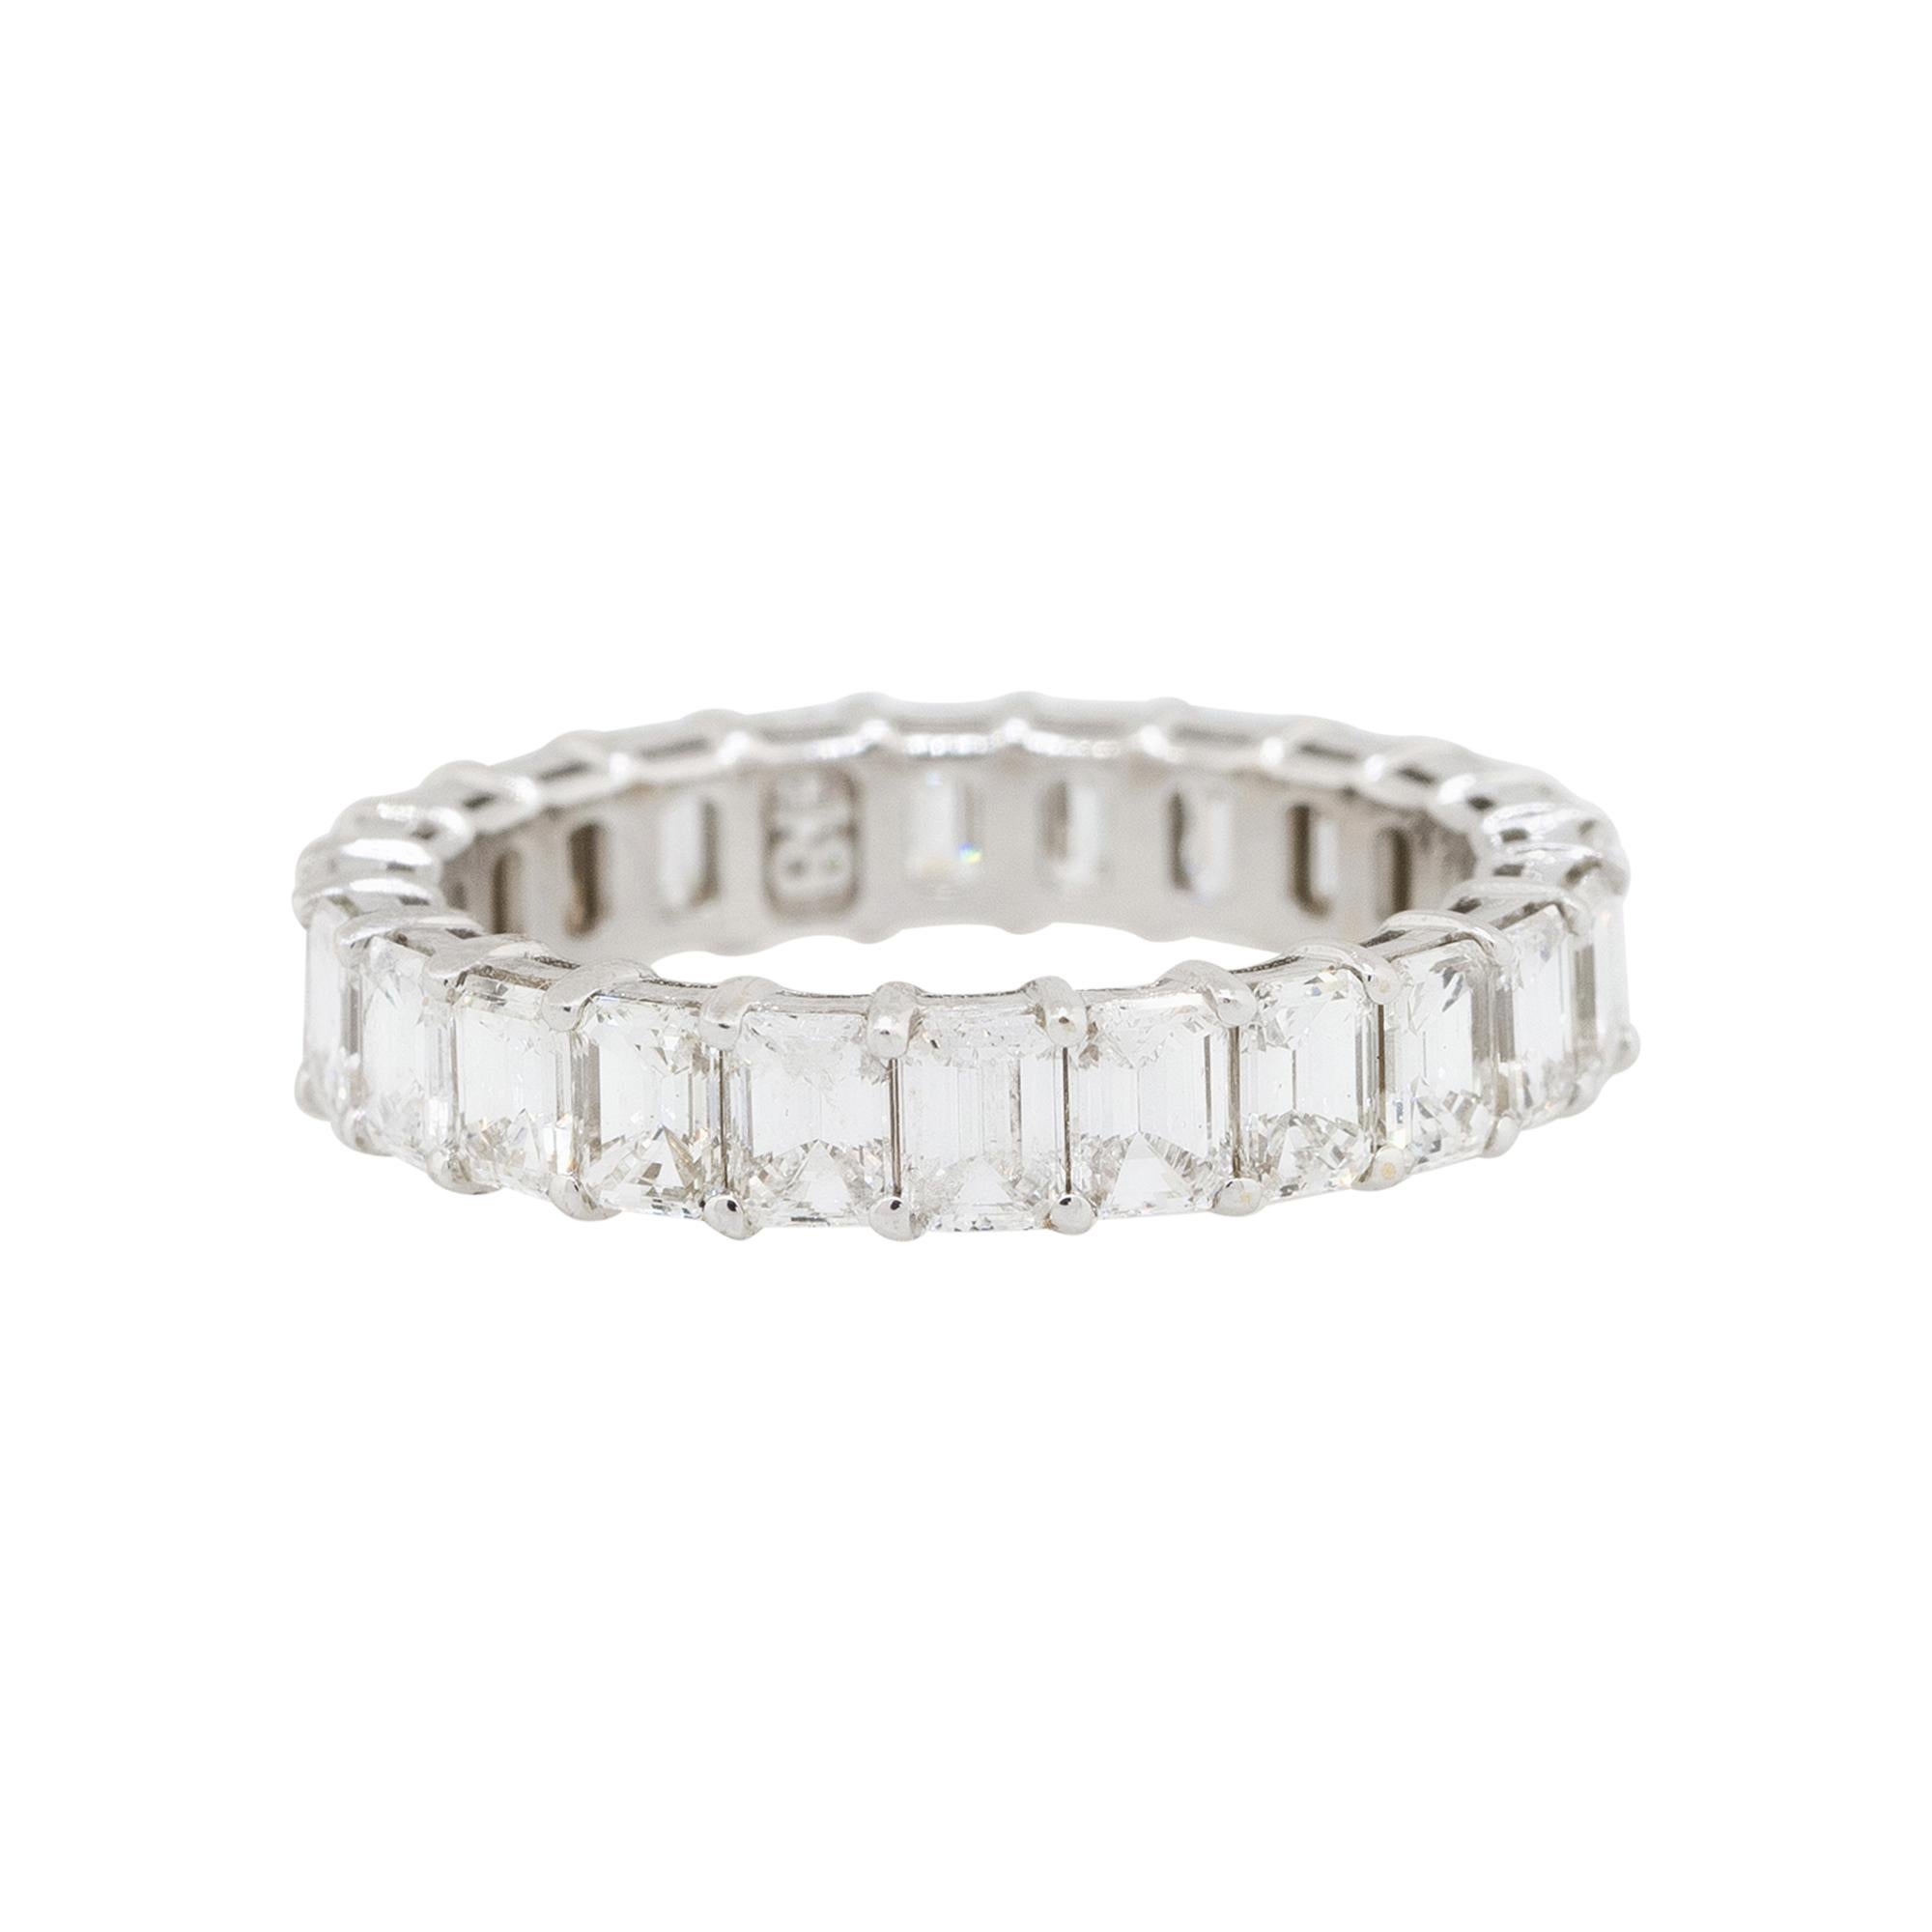 Material: 14k white gold
Diamond Details: Approx. 3.54ctw of emerald cut Diamonds. Diamonds are G/H in color and VS in clarity
Size: 6.25 
Measurements: 21.70mm x 4mm x 21.70mm
Weight: 3g (1.9dwt)
Additional Details: This item comes with Raymond Lee